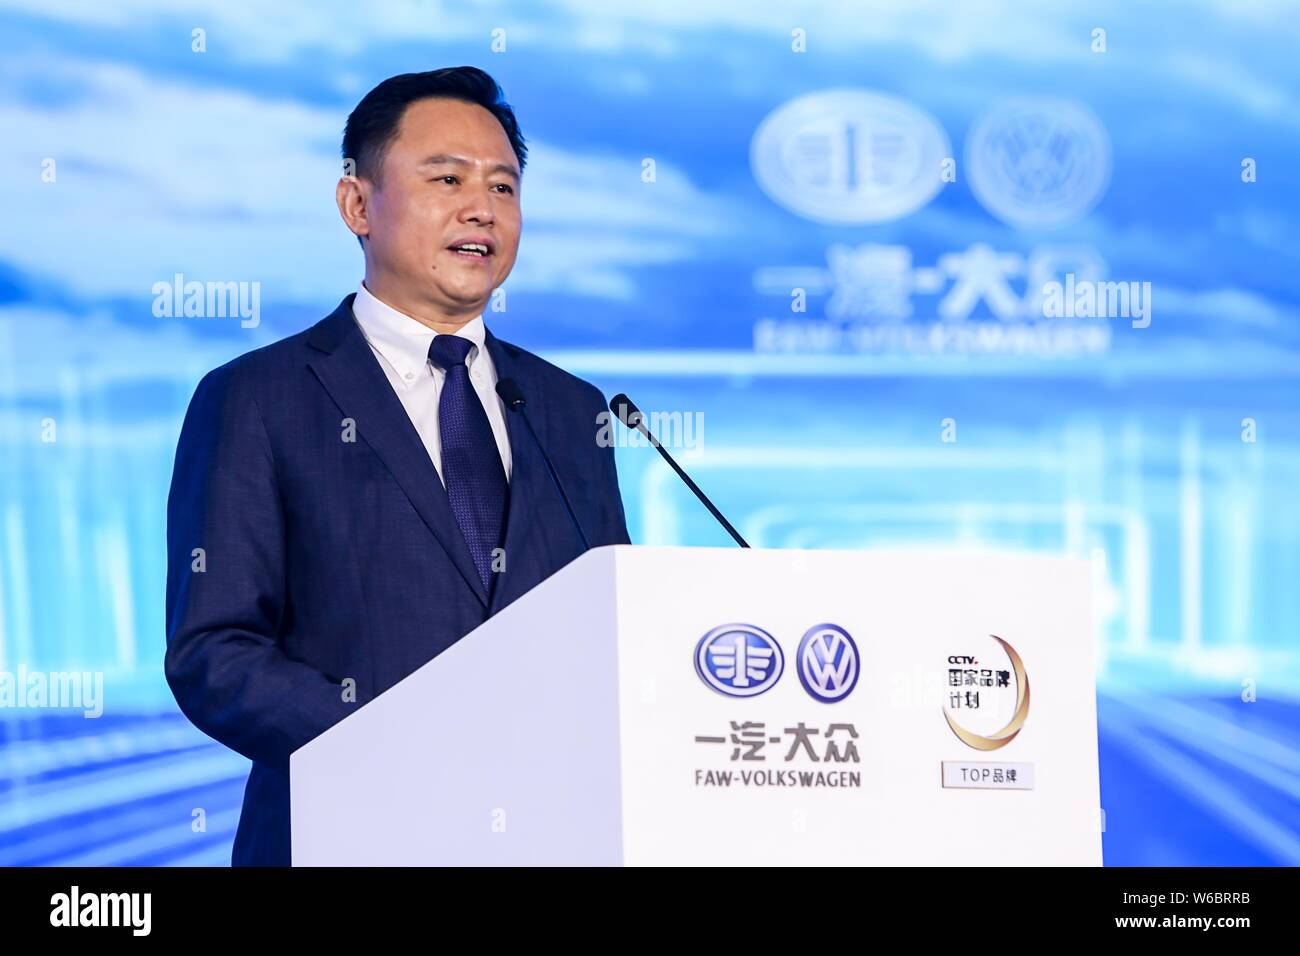 Xu Liuping, Chairman of FAW Group Corp., speaks during the FAW-Volkswagen East China Base Inauguration and the Next Generation Bora Launch Ceremony in Stock Photo